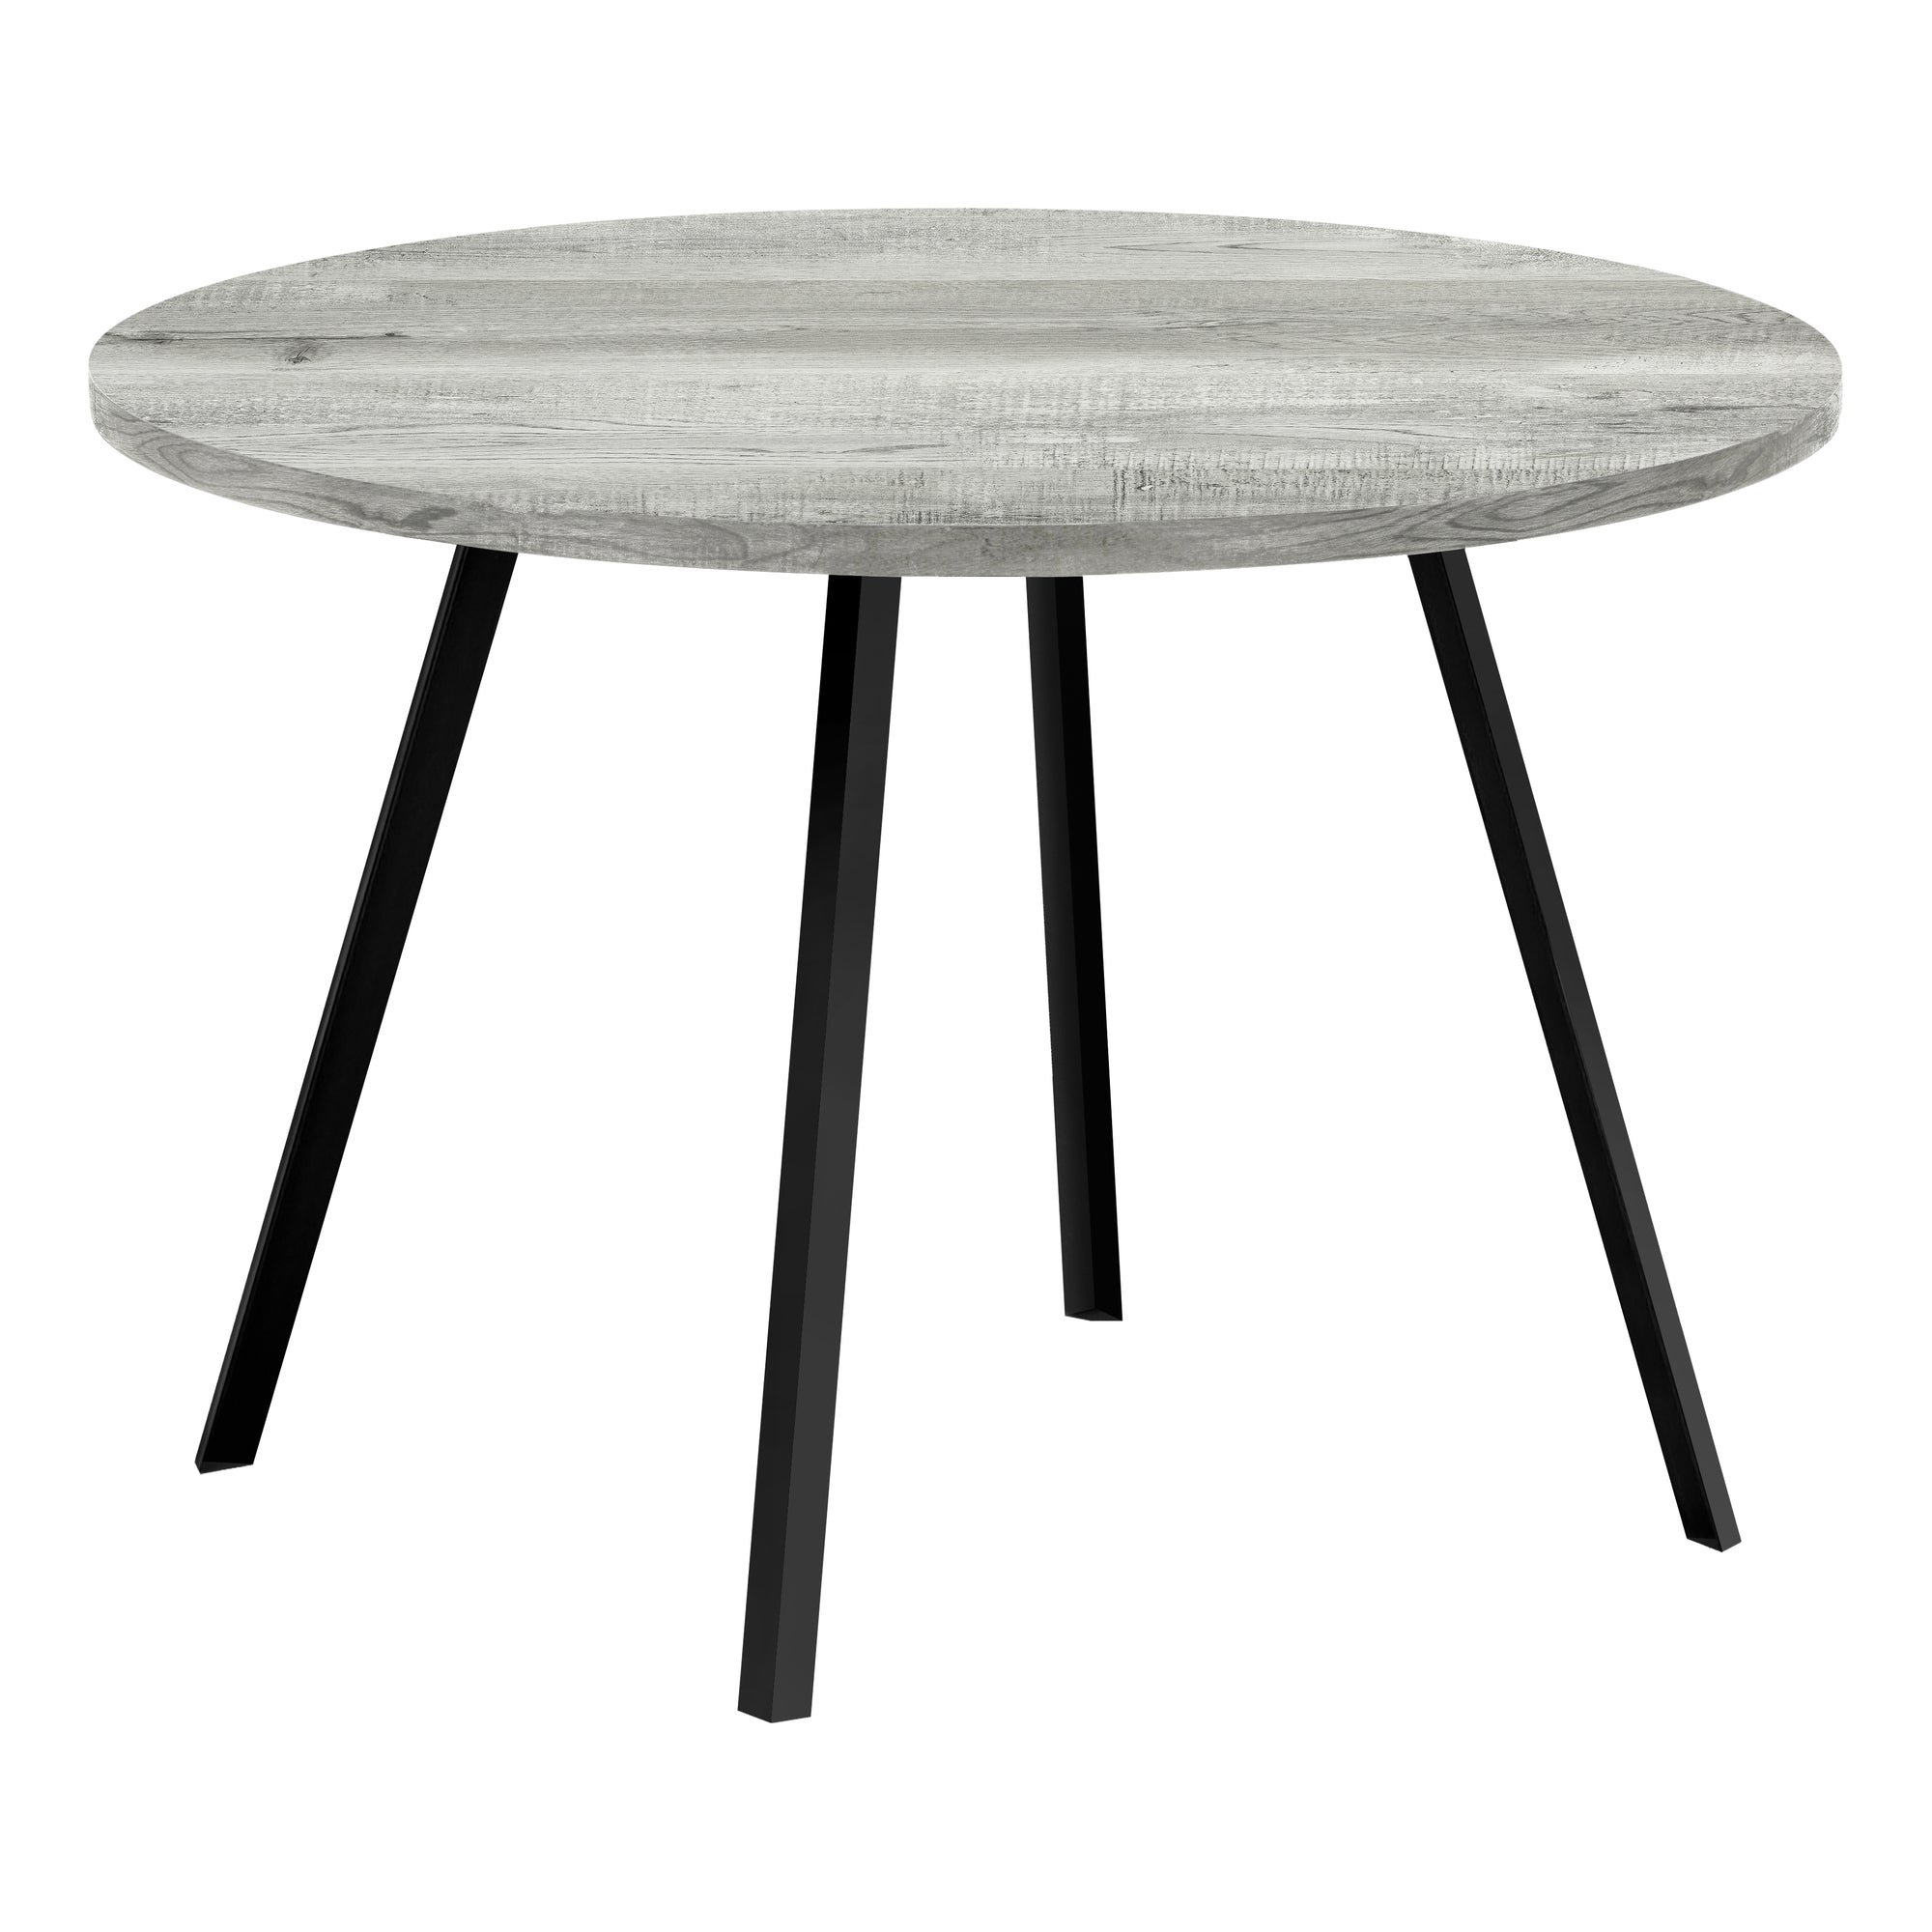 48" DIA Grey Reclaimed Wood Dining Table